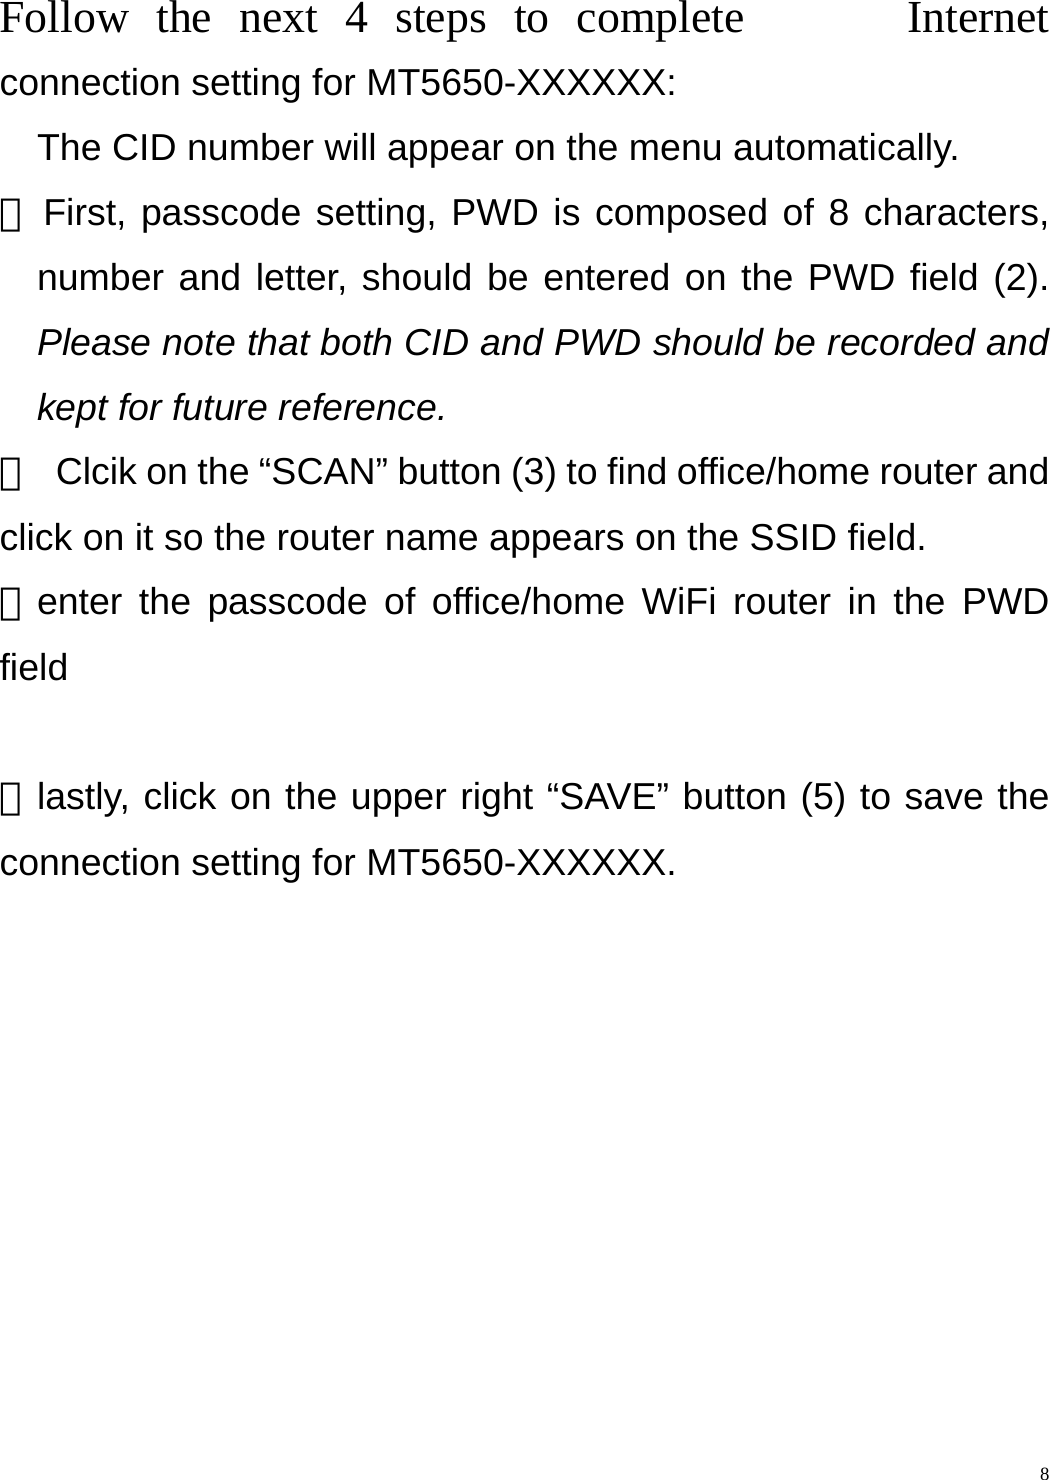    8Follow the next 4 steps to complete      Internet connection setting for MT5650-XXXXXX:     The CID number will appear on the menu automatically.   ① First, passcode setting, PWD is composed of 8 characters, number and letter, should be entered on the PWD field (2). Please note that both CID and PWD should be recorded and kept for future reference. ②  Clcik on the “SCAN” button (3) to find office/home router and click on it so the router name appears on the SSID field. ③enter the passcode of office/home WiFi router in the PWD field   ④lastly, click on the upper right “SAVE” button (5) to save the connection setting for MT5650-XXXXXX. 